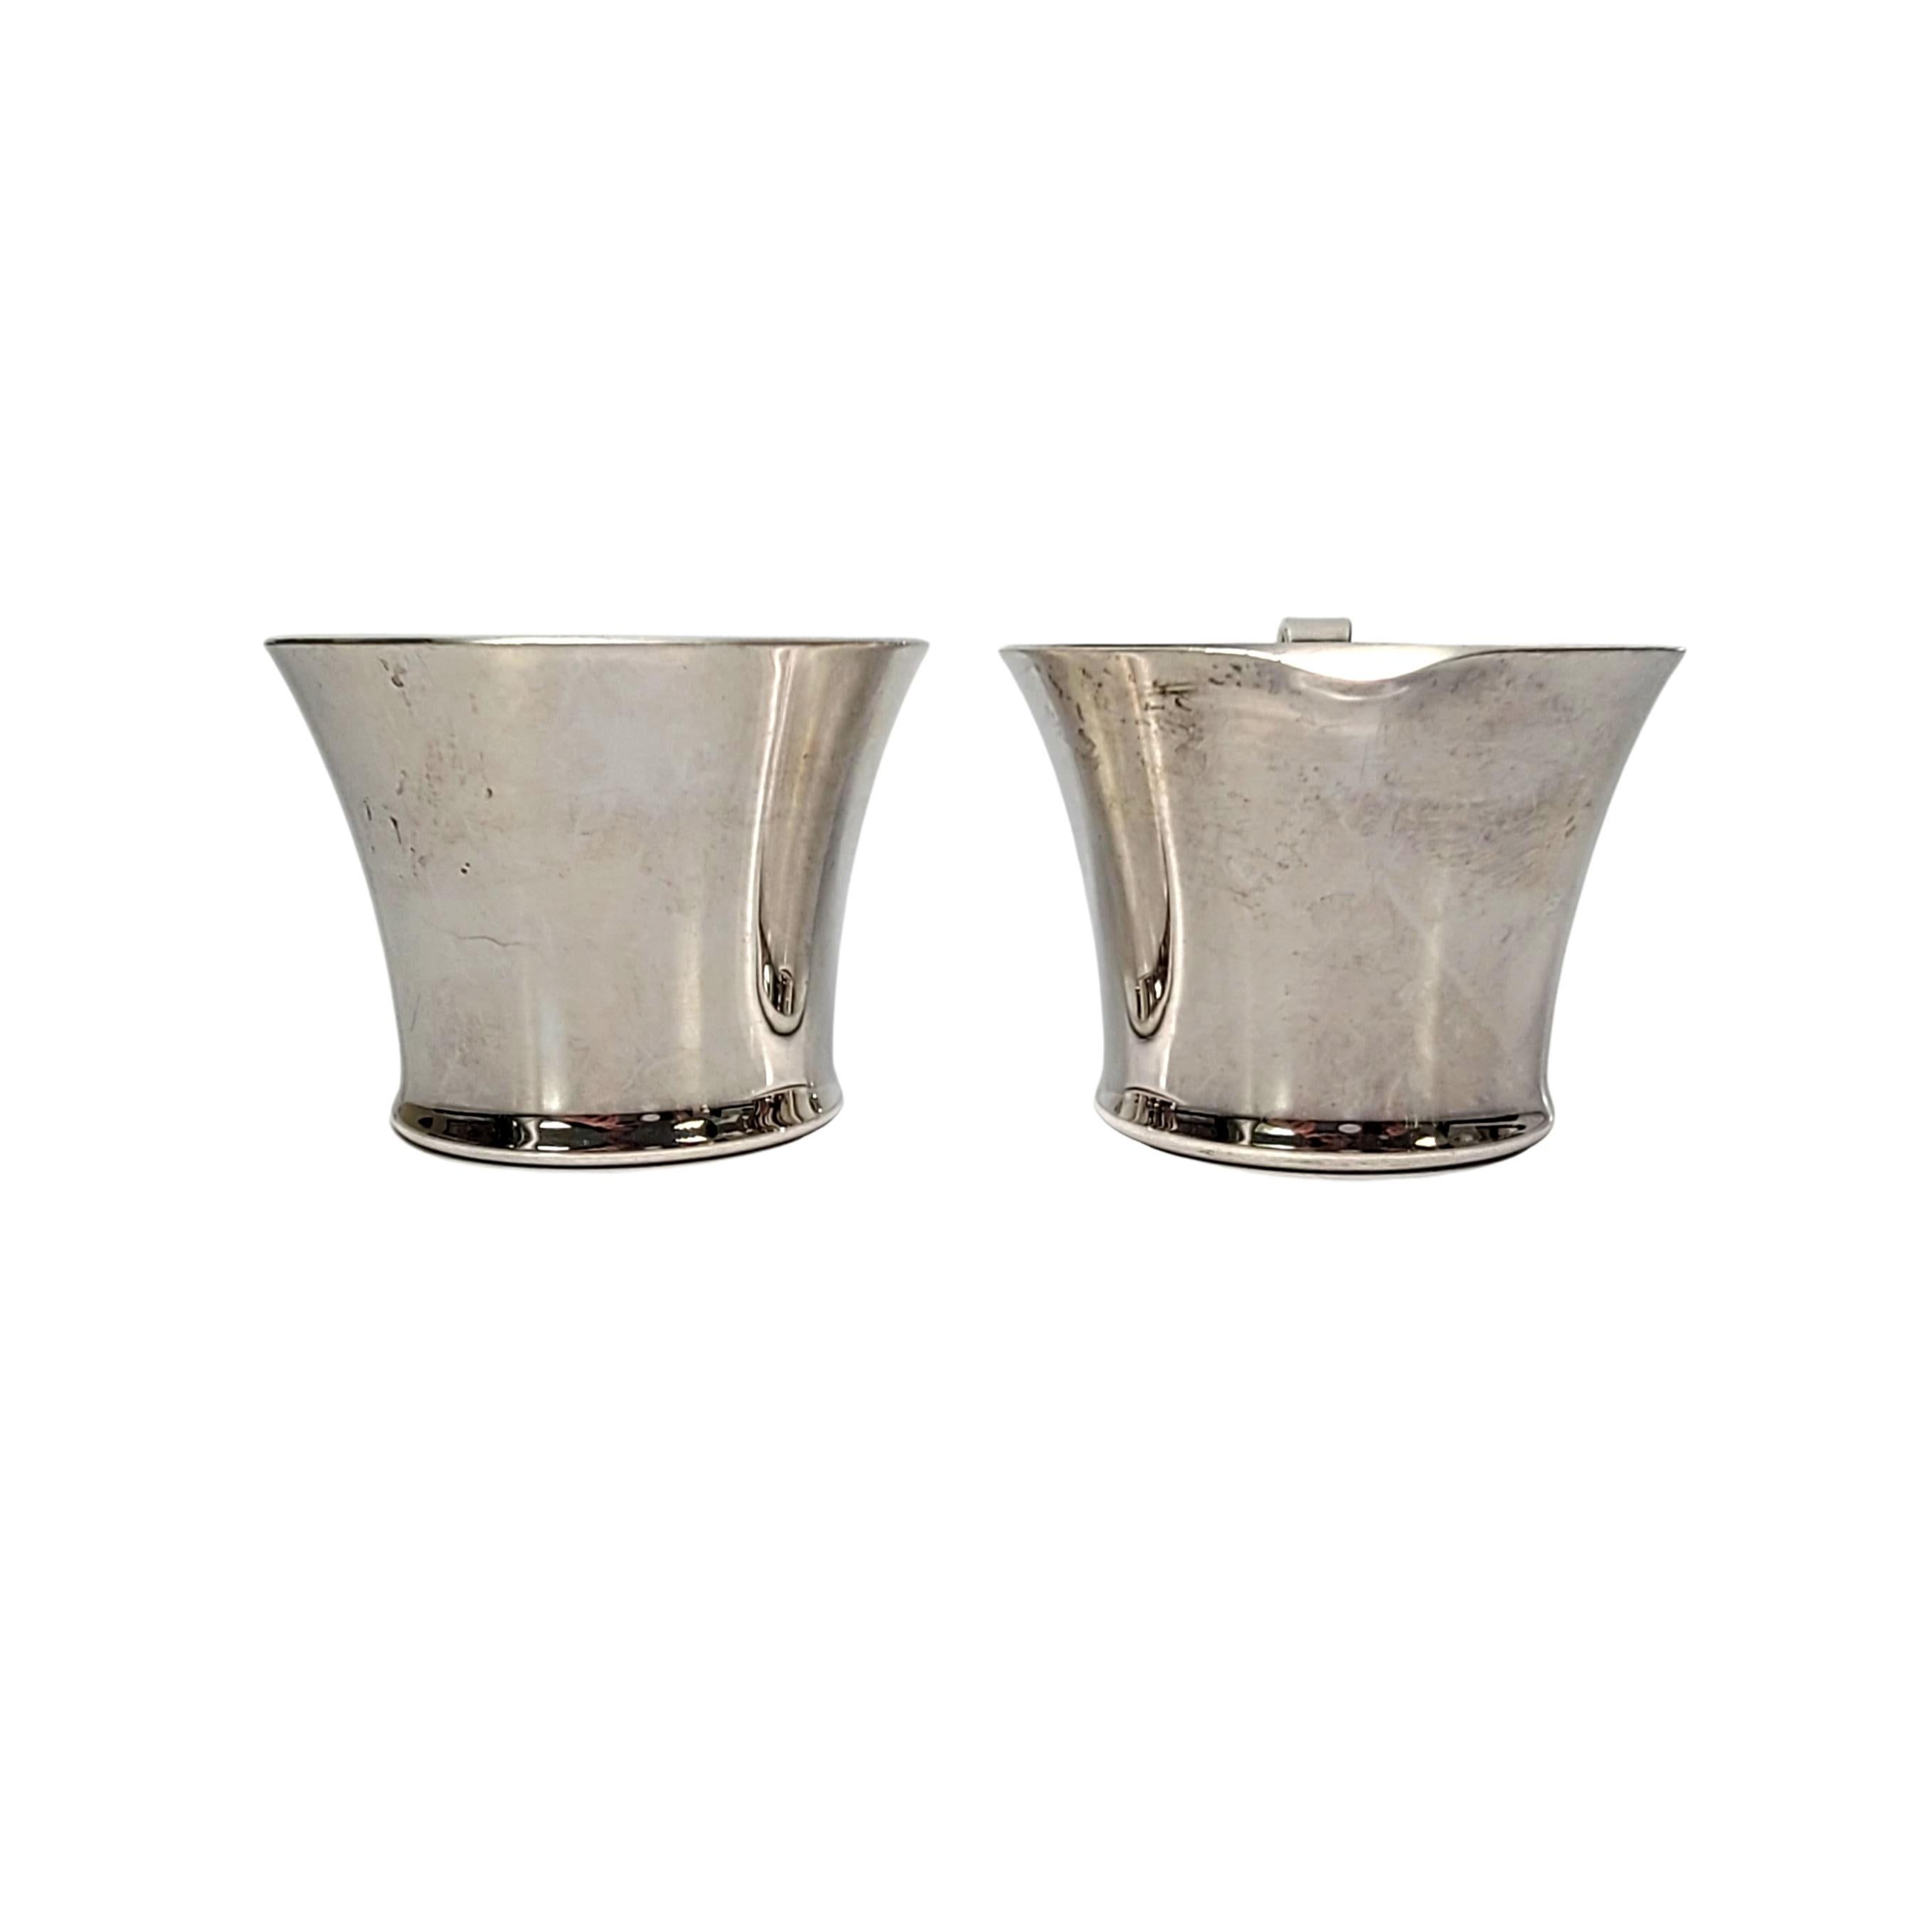 Sterling silver open creamer and sugar bowl set designed by Porter Blanchard.

Designed by Porter Blanchard, a prominent California silversmith in the Arts and Crafts tradition from 1930s-1970s.. A beautiful and simple design with classic, timeless